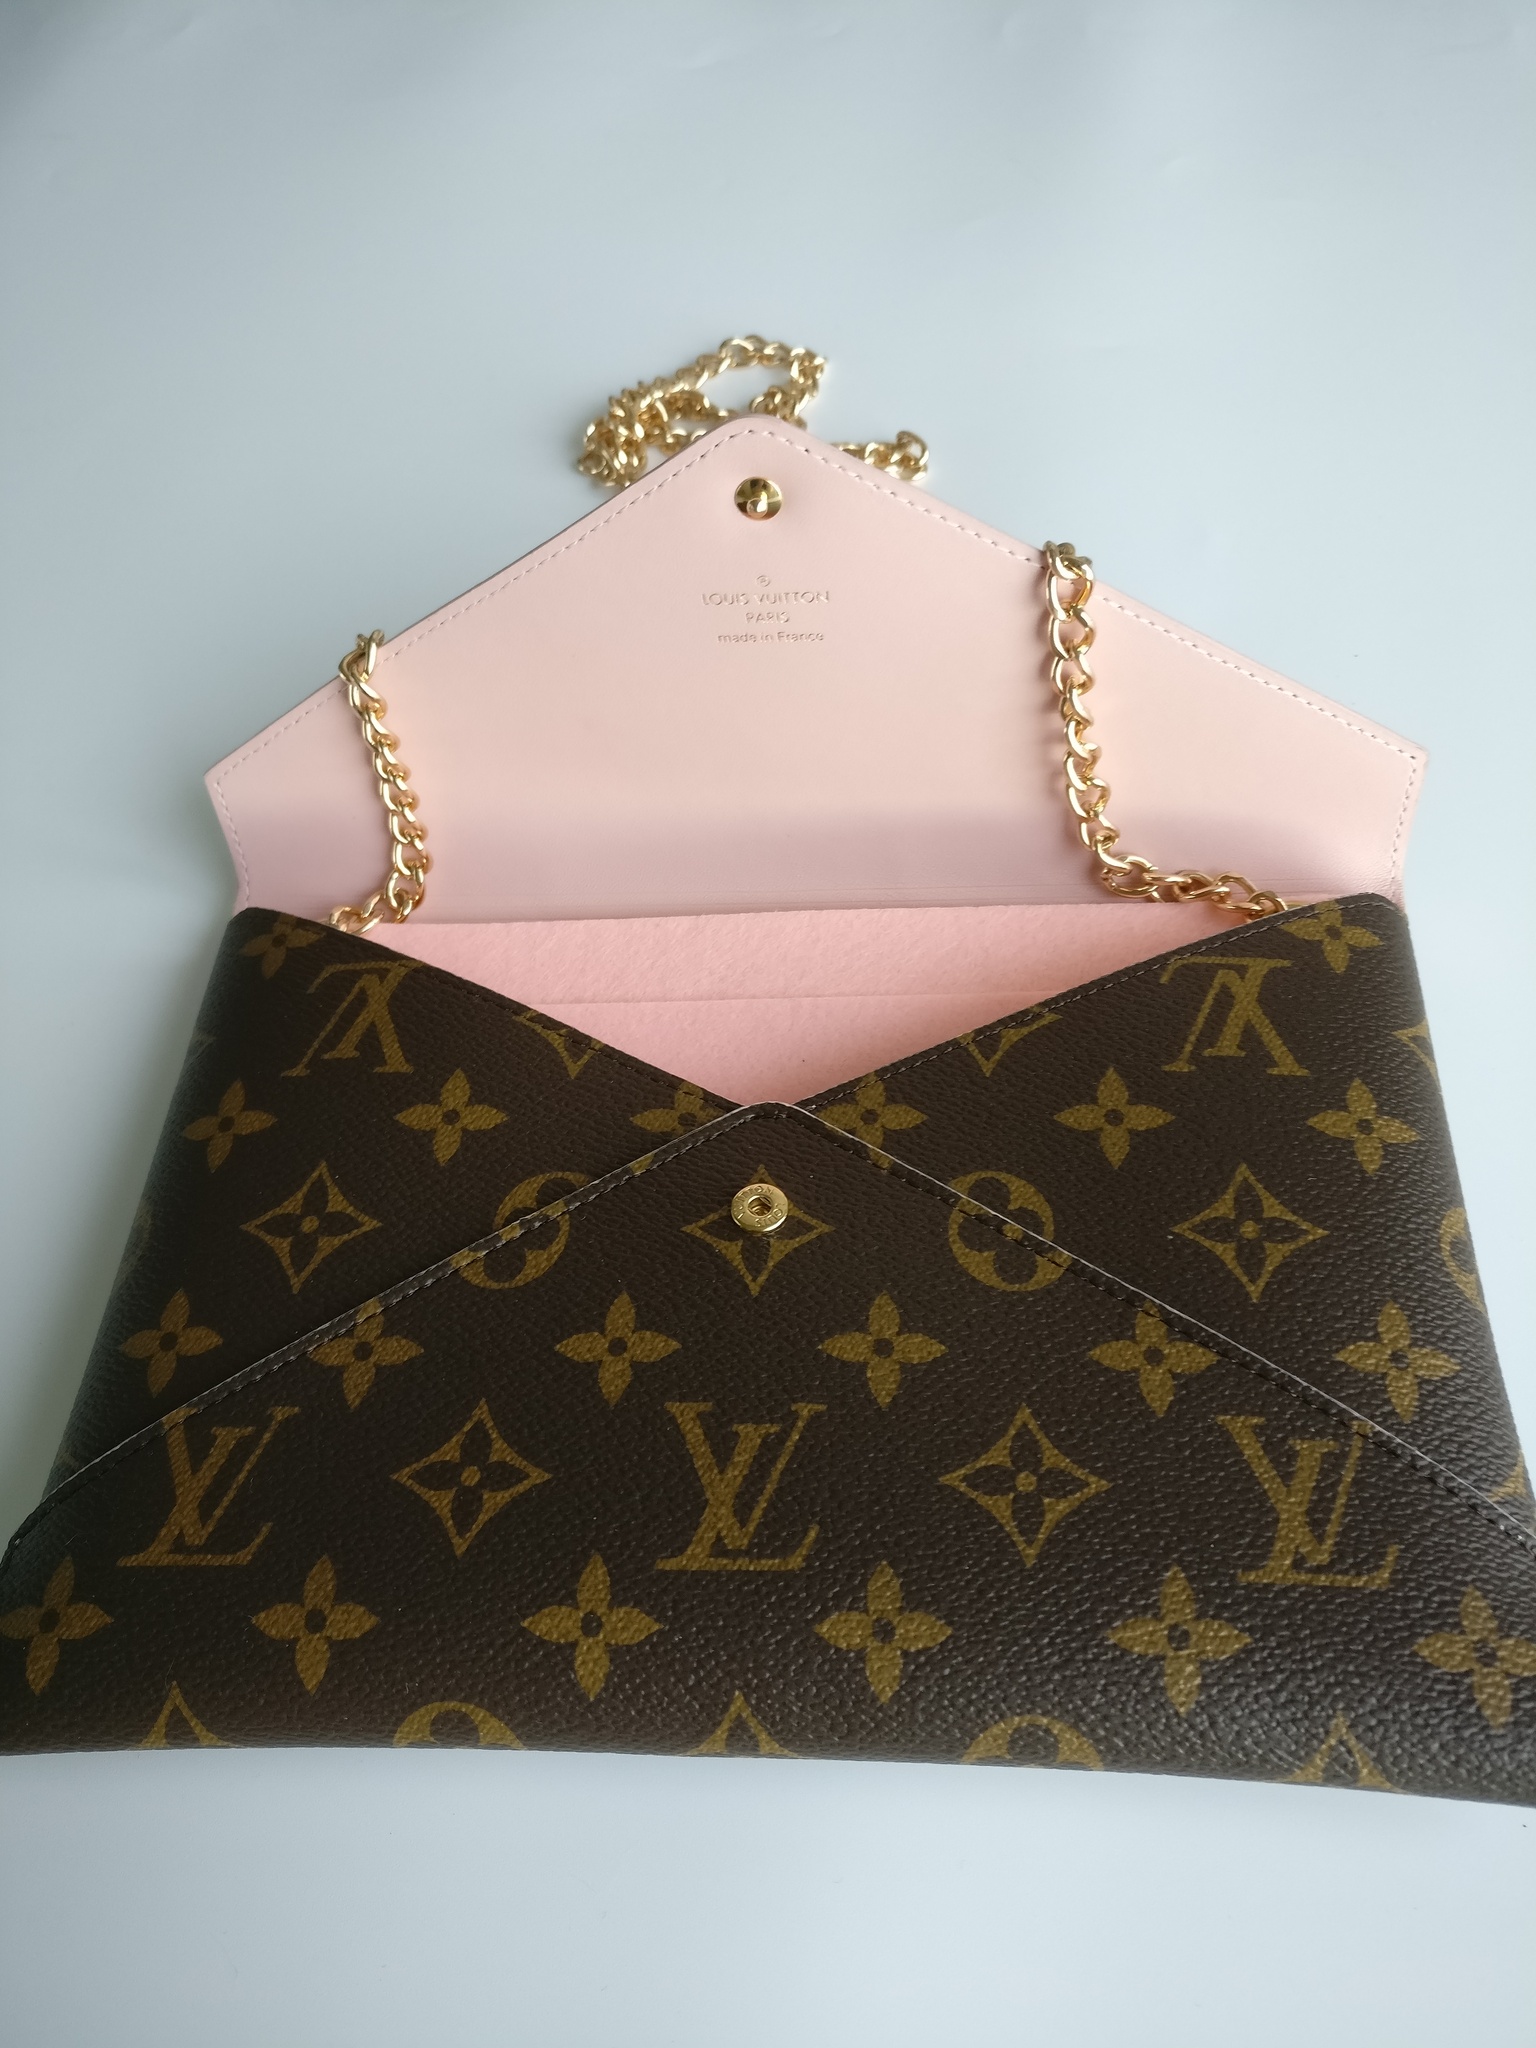 louis vuitton insert with chain